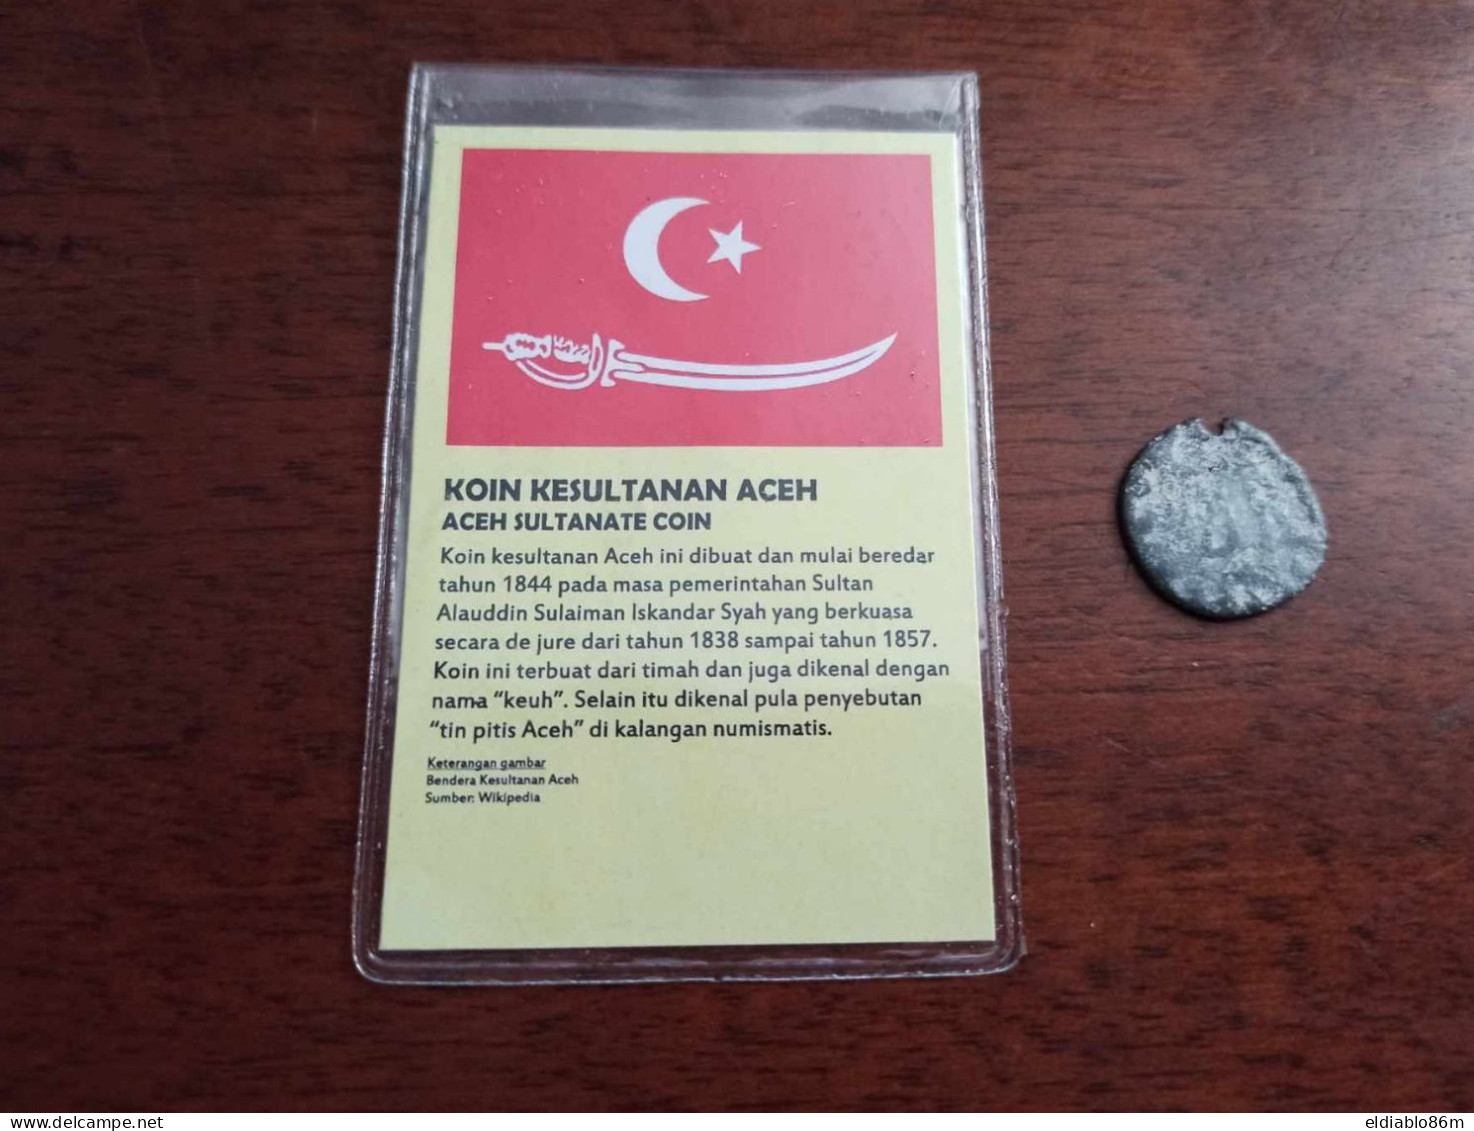 INDONESIA - ACEH SULTANATE COIN - 19TH CENTURY - ONE COIN ON SALE (FRONT BACK PICTURE) - Indonésie